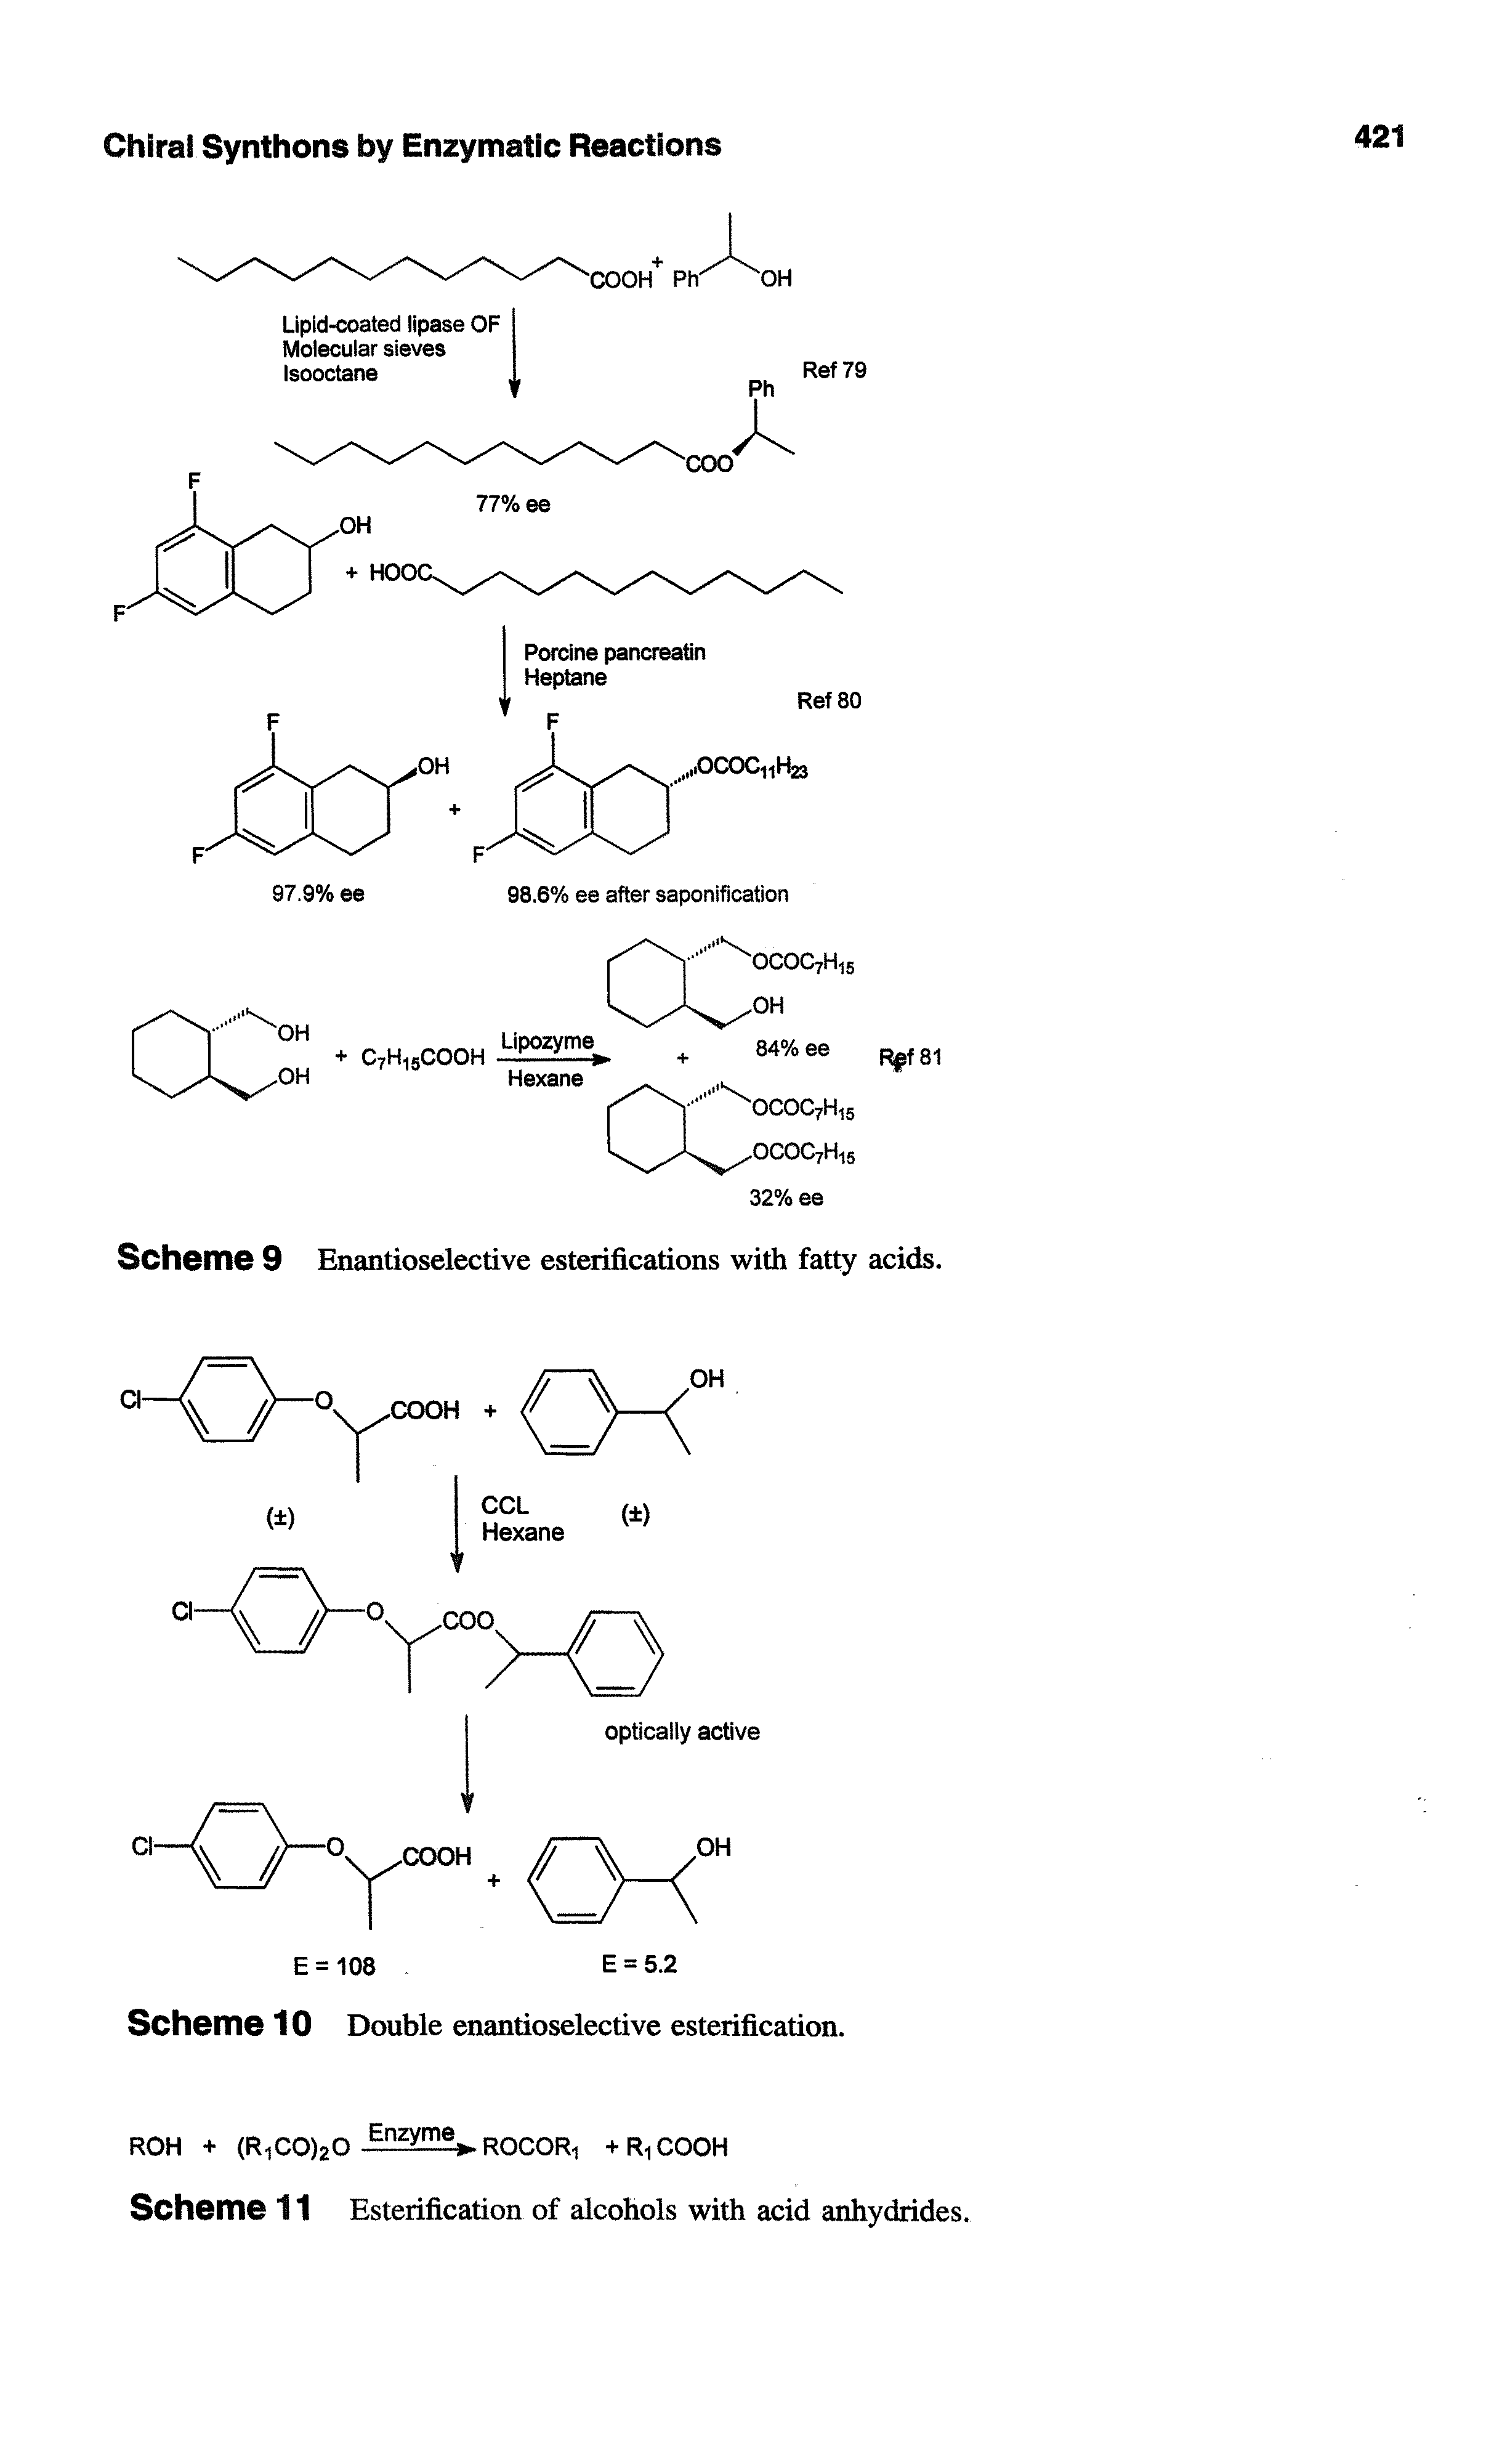 Scheme 11 Esterification of alcohols with acid anhydrides.